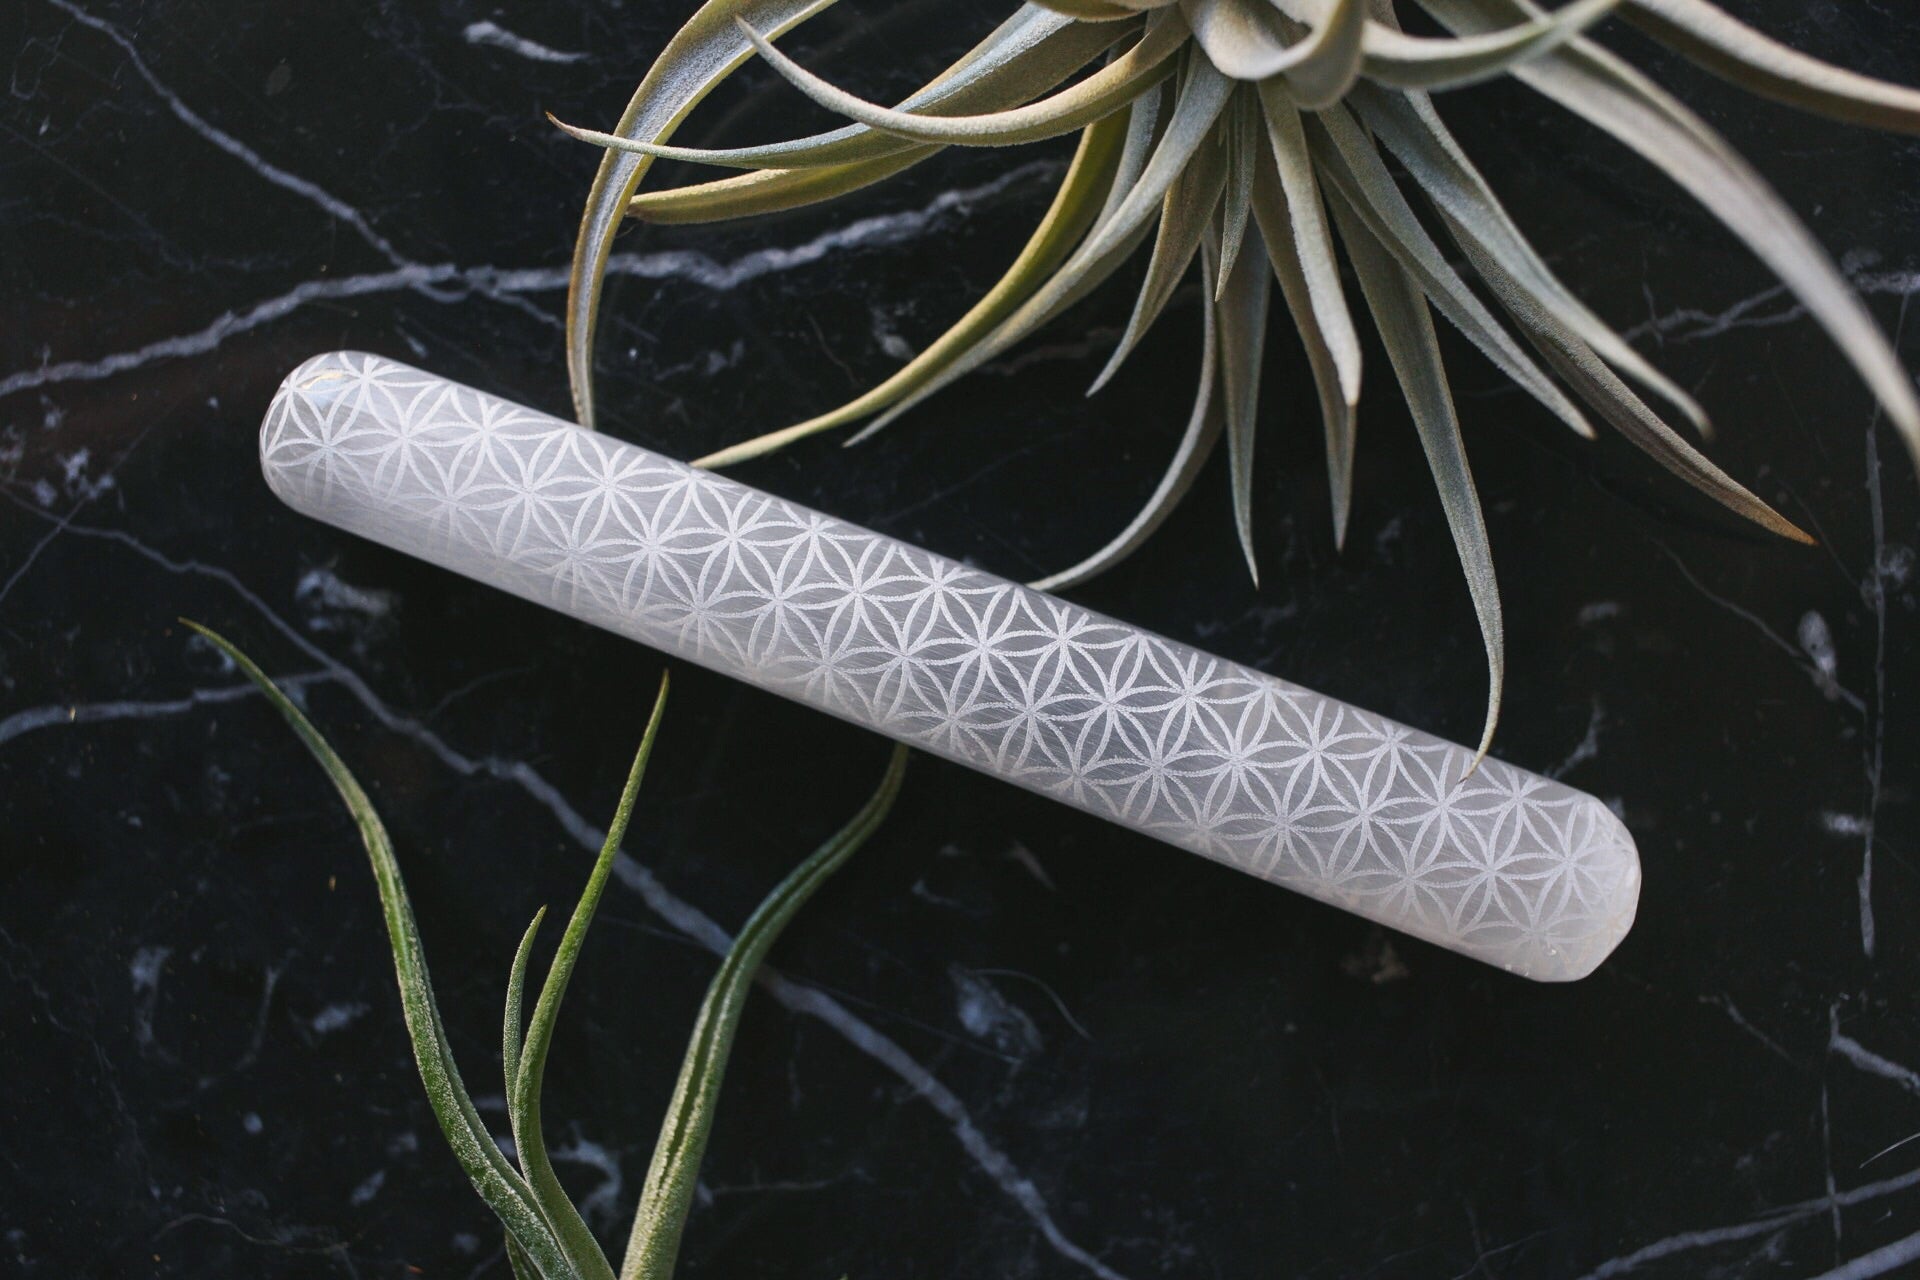 Etched Selenite Massage Wand Sacred Geometry "Flower of Life" - Fractalista Designs